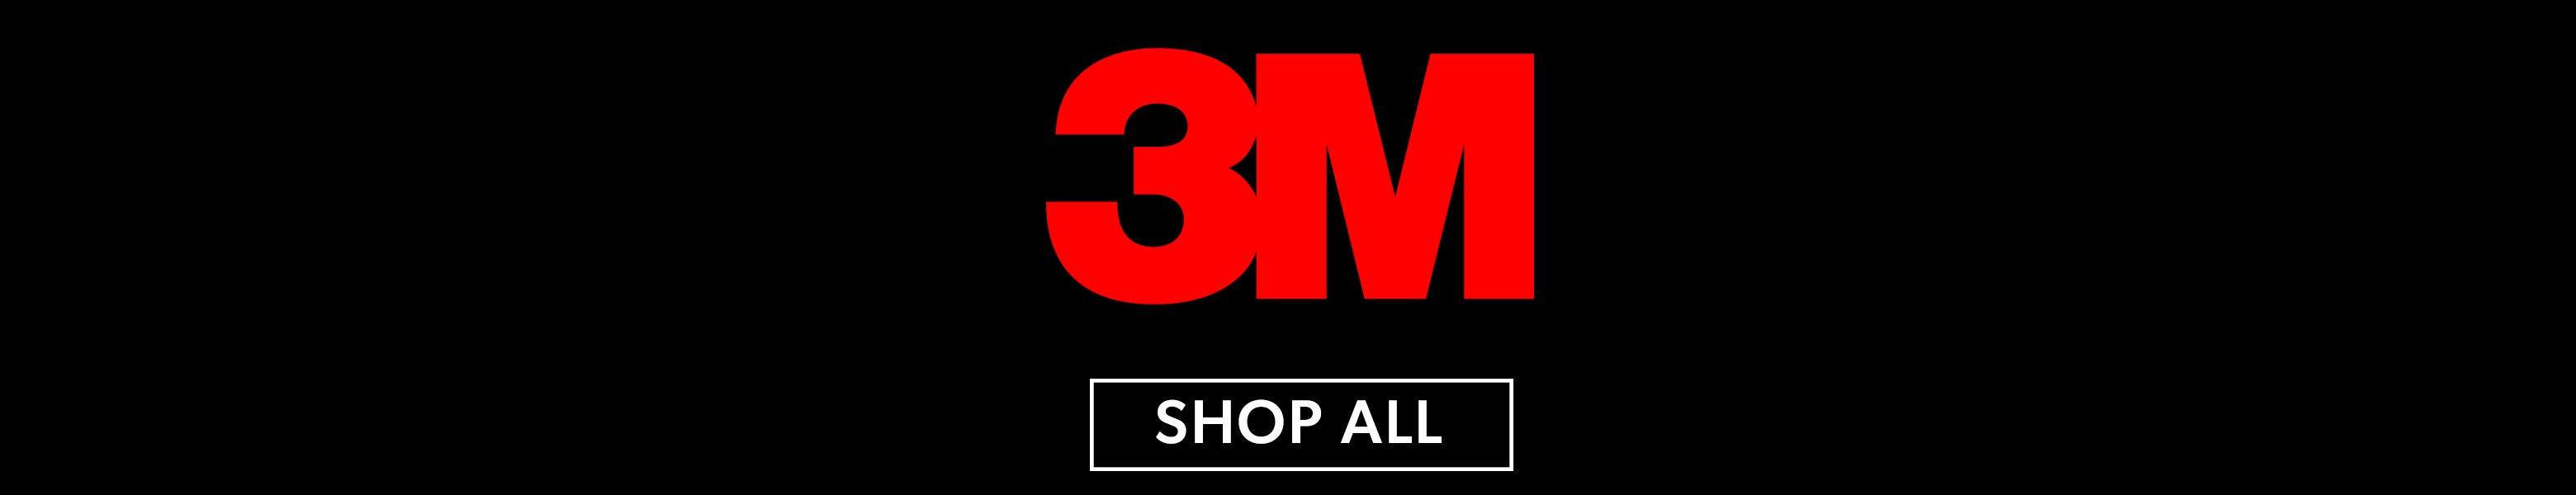 3M Footer Shop All